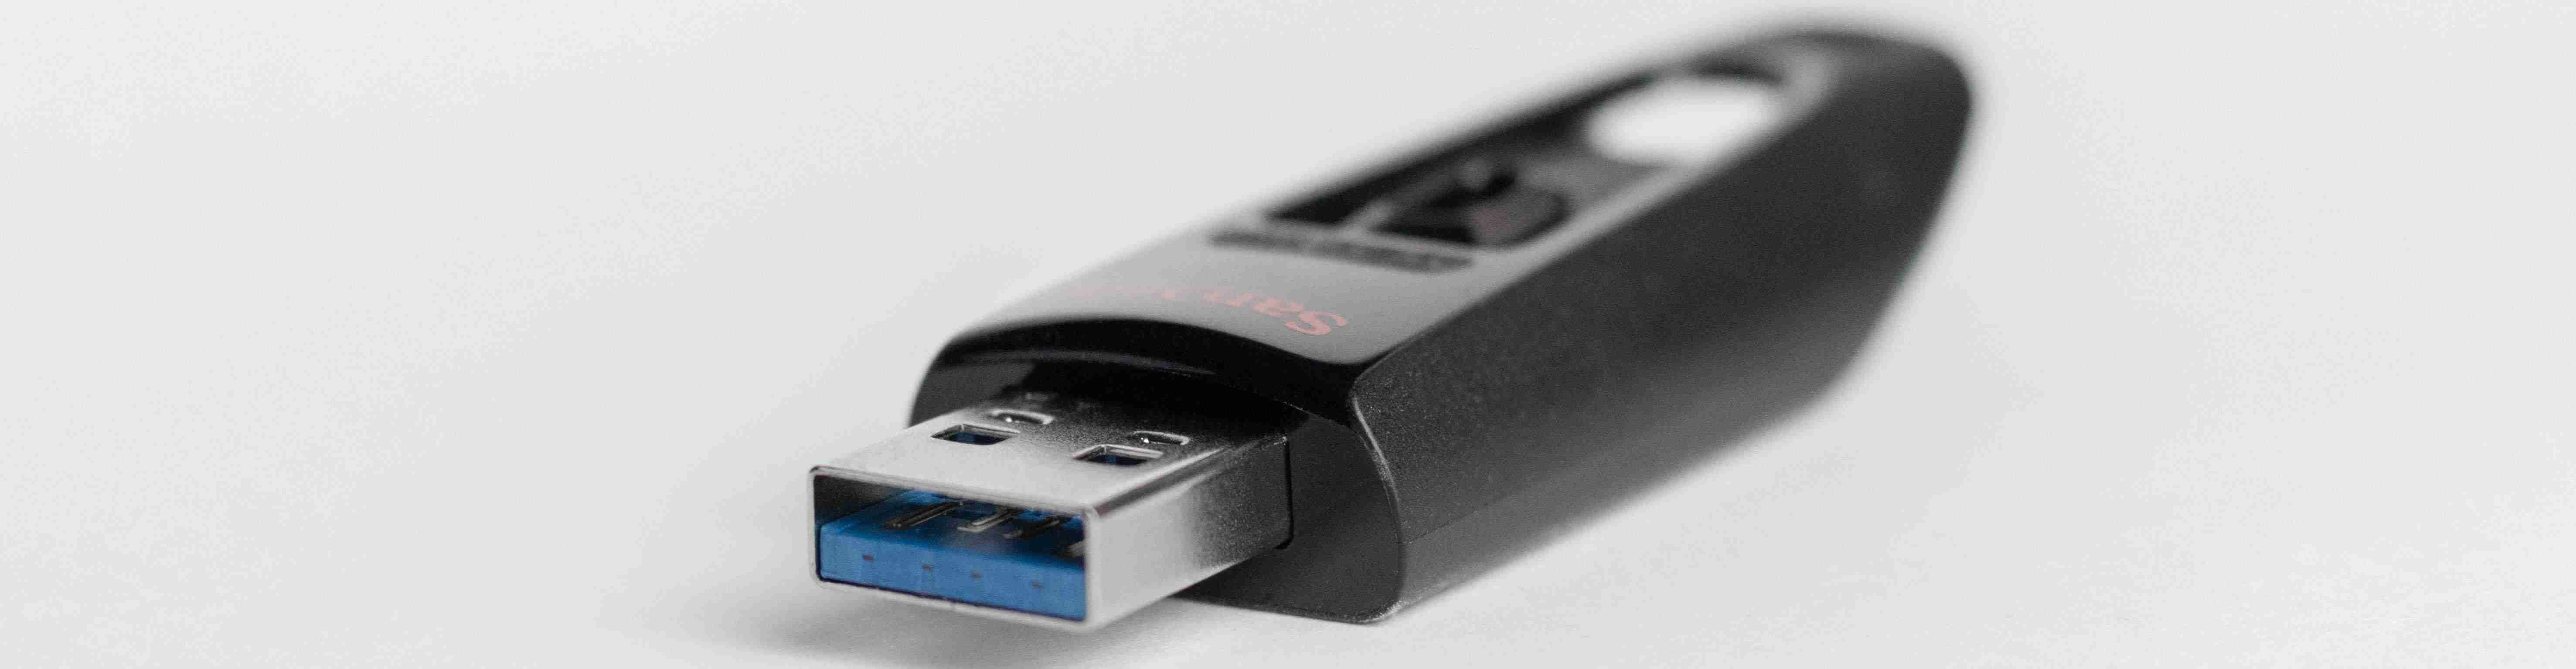 A black sandisk USB 3.0 thumb drive with a white background